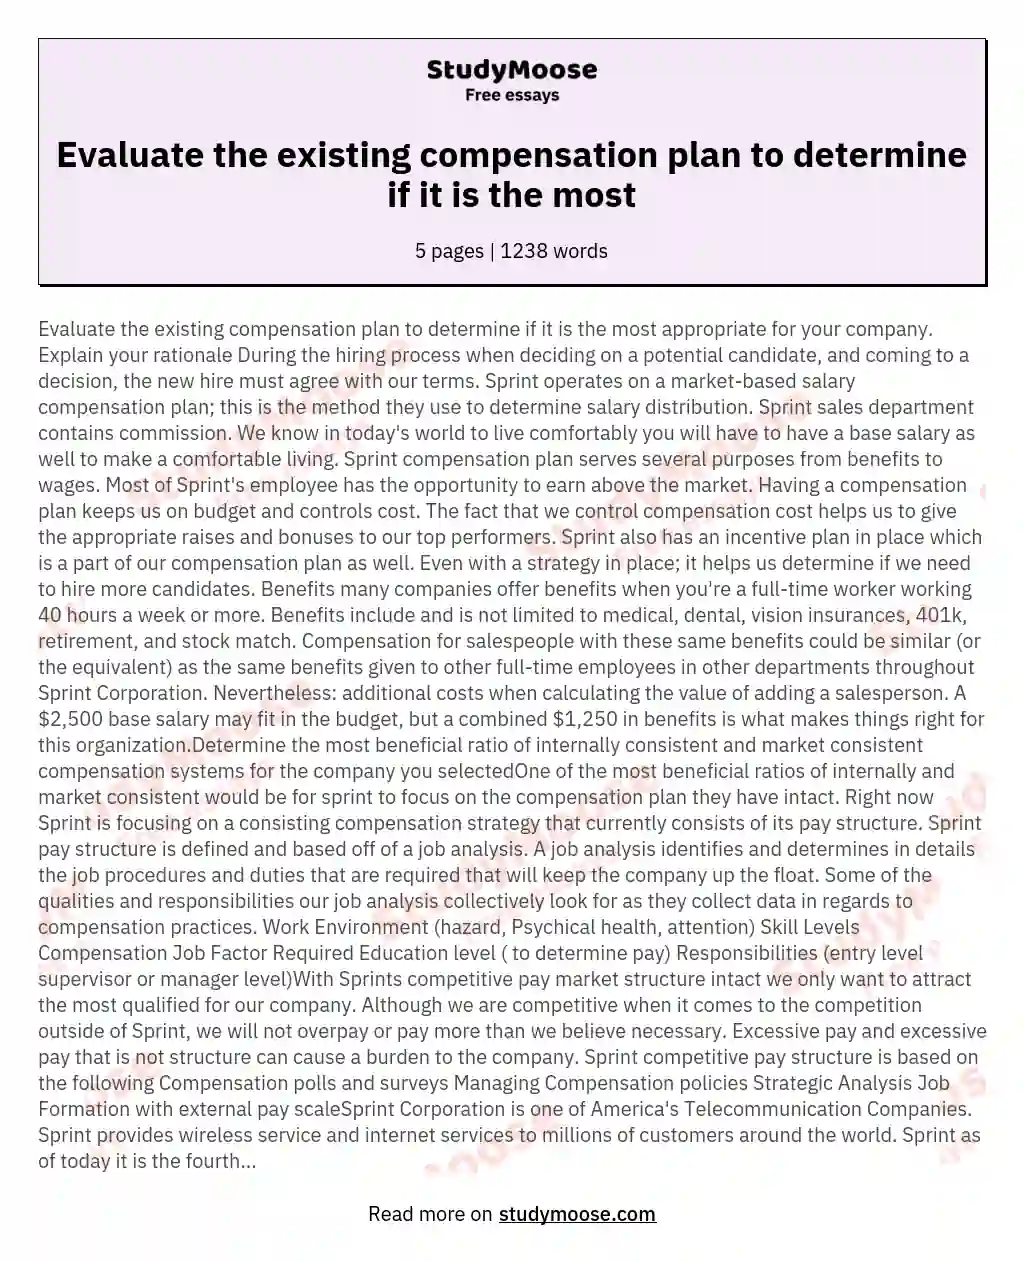 Evaluate the existing compensation plan to determine if it is the most